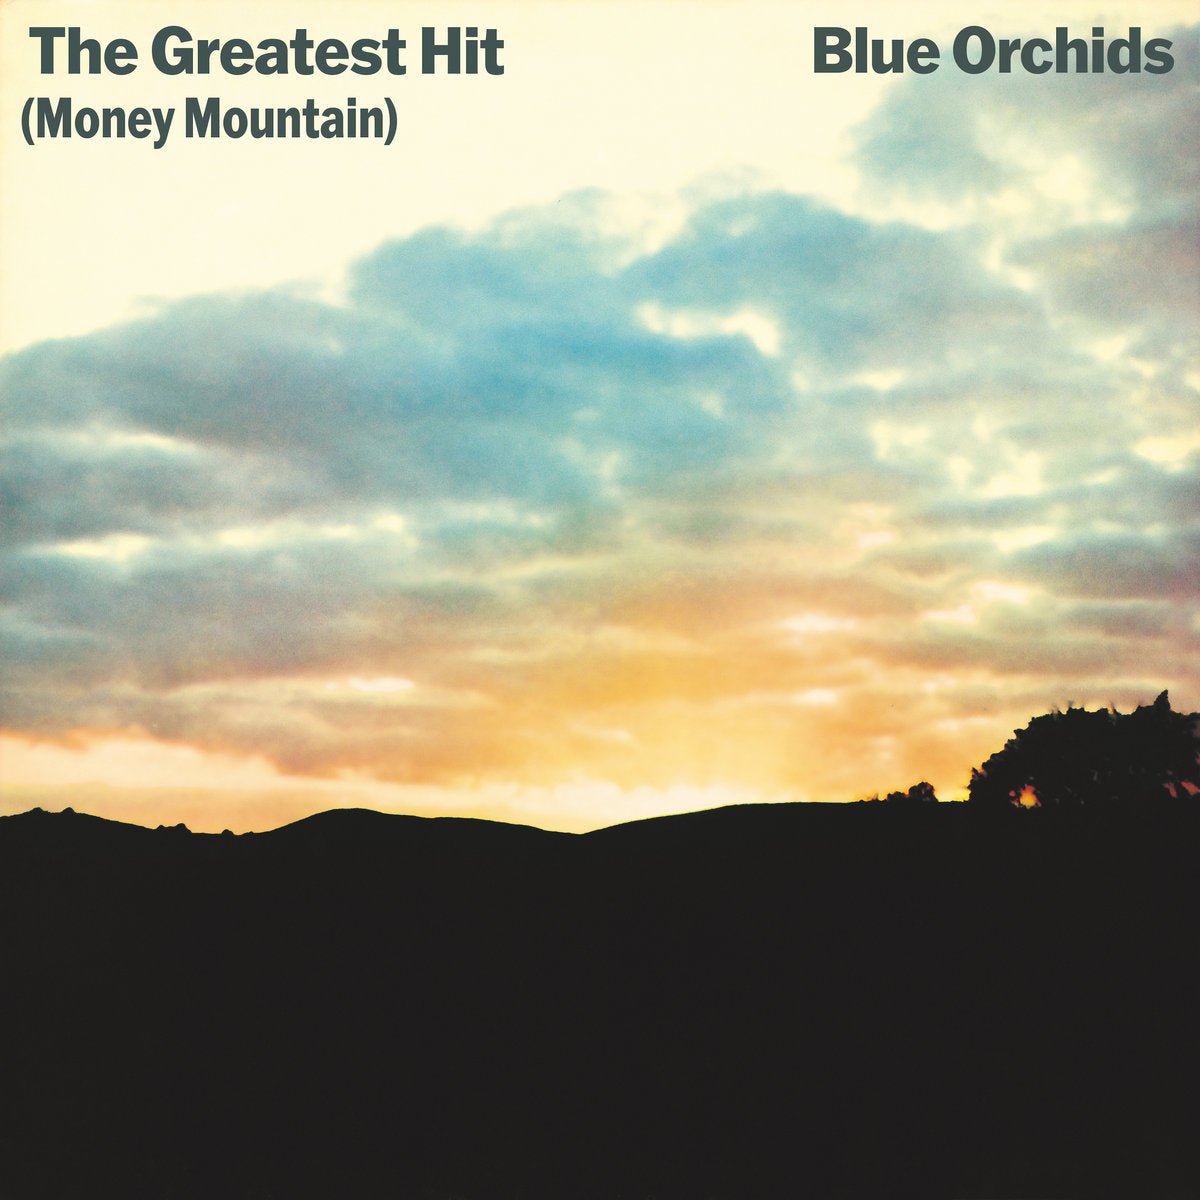 Blue Orchids - The Greatest Hit (Money Mountain) [Deluxe Edition] - 2LP - Vinyl